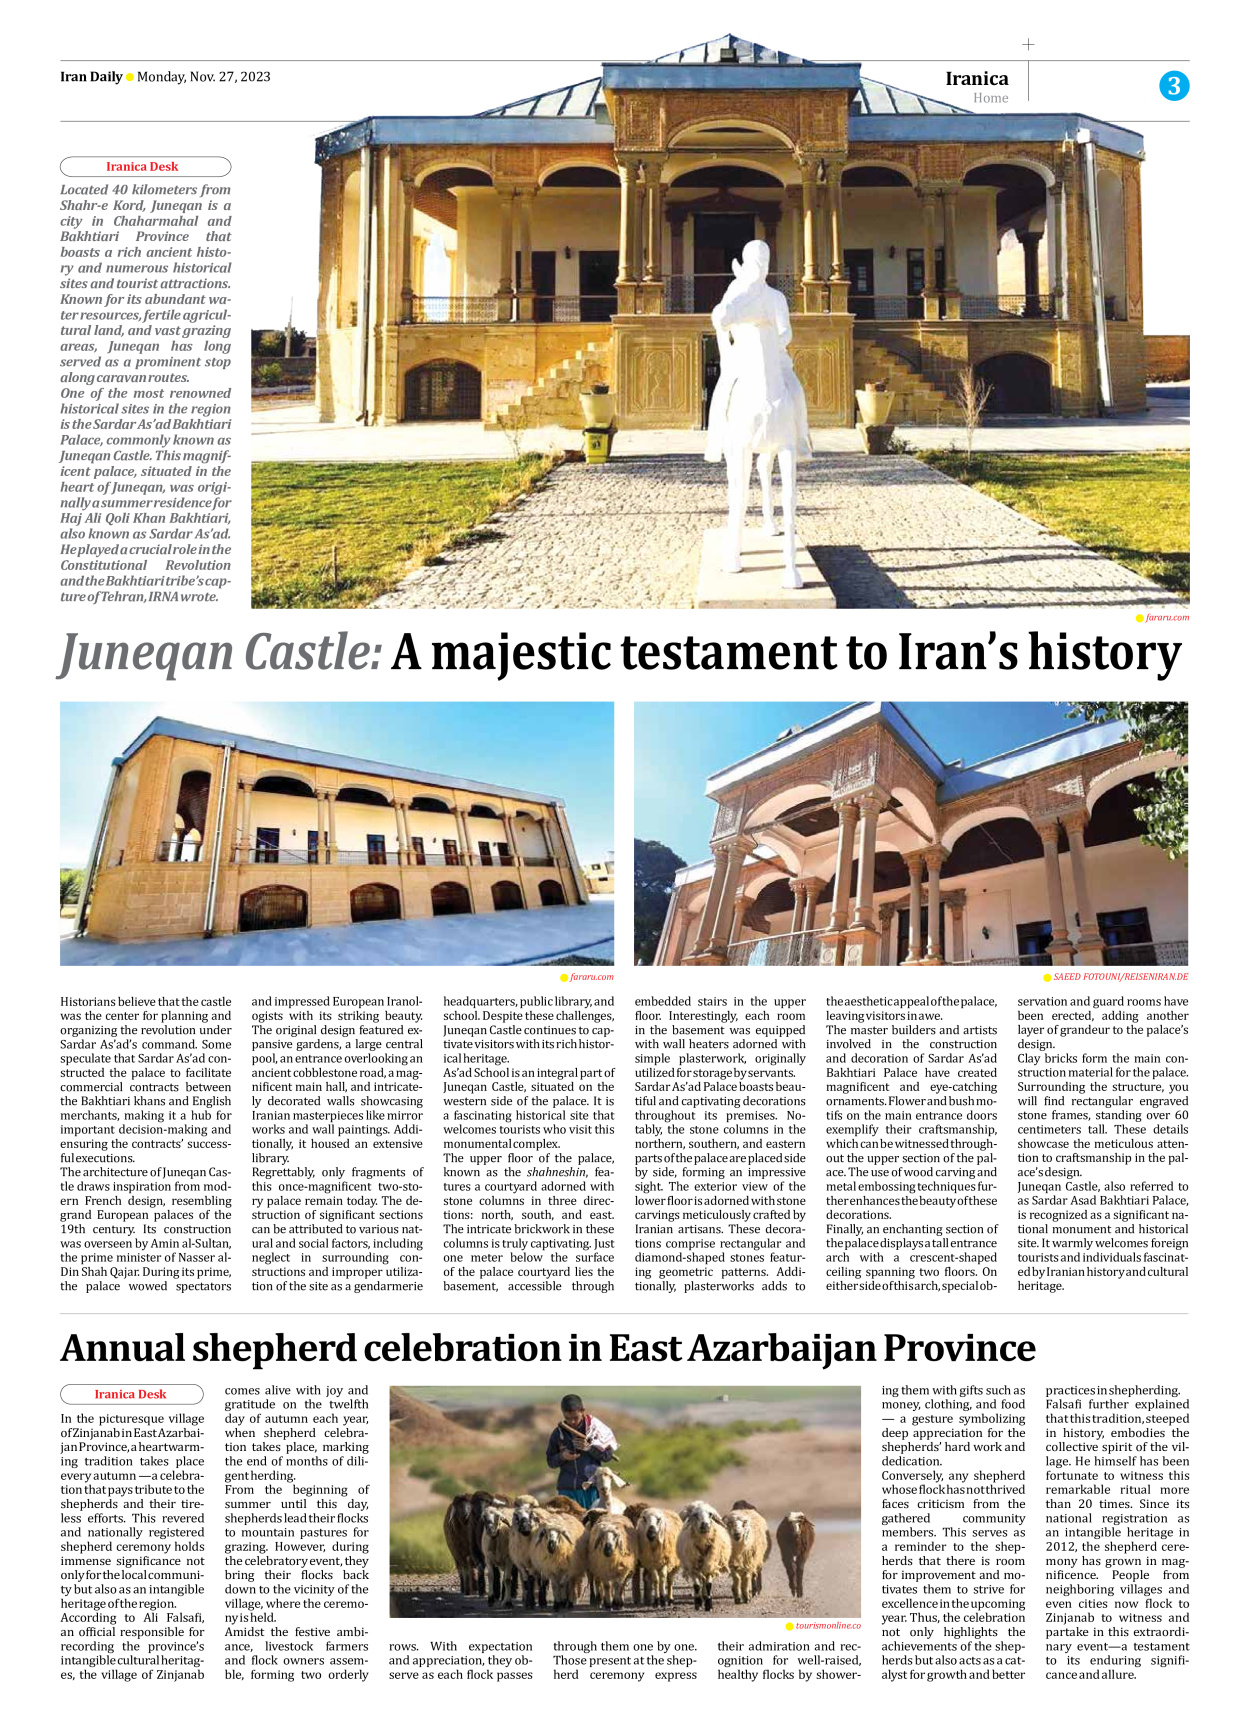 Iran Daily - Number Seven Thousand Four Hundred and Forty Five - 27 November 2023 - Page 3